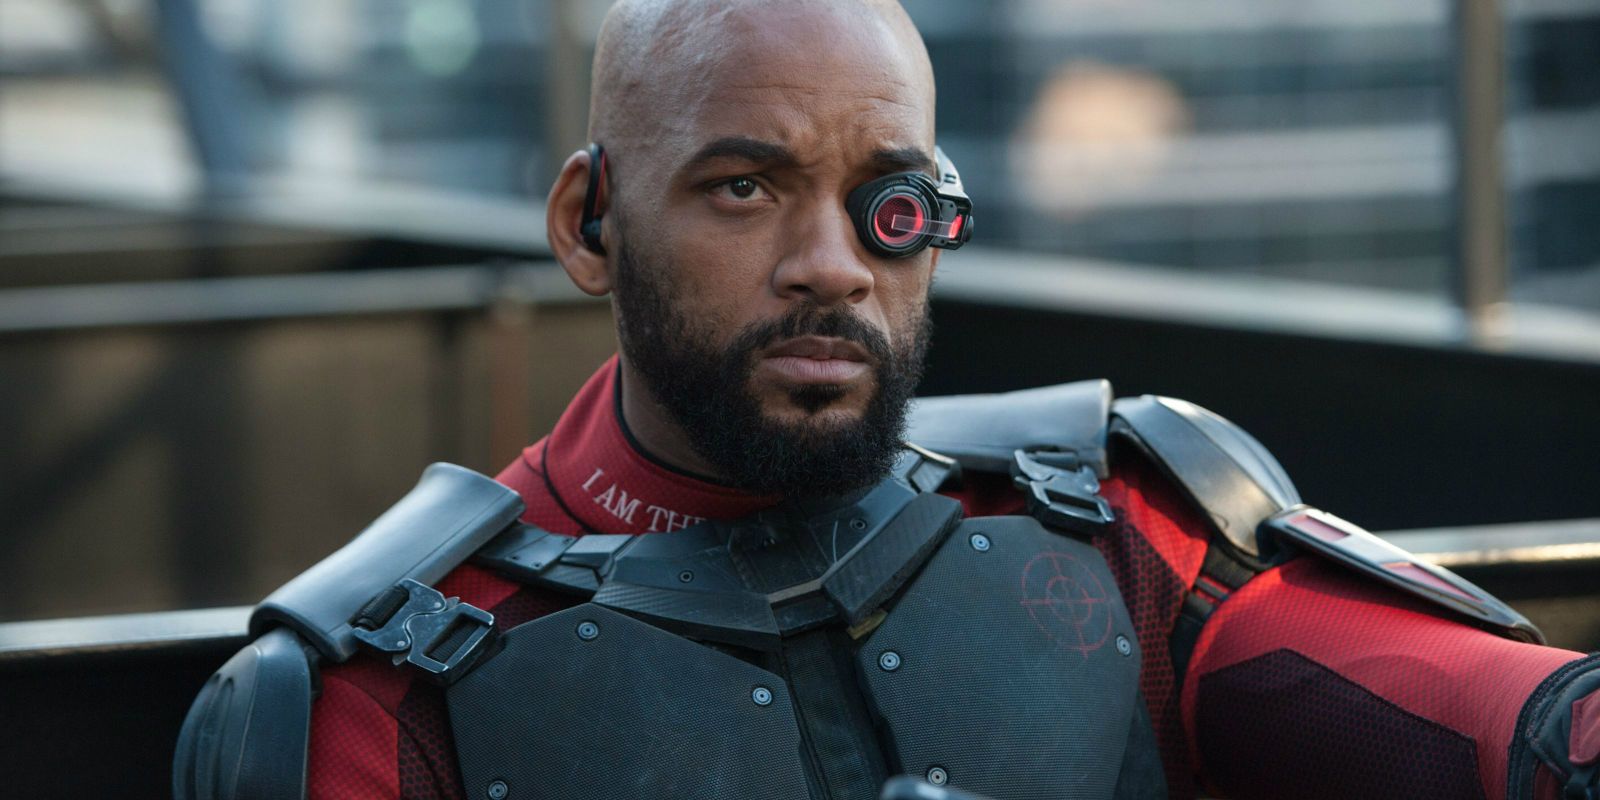 Suicide Squad - Will Smith as Deadshot